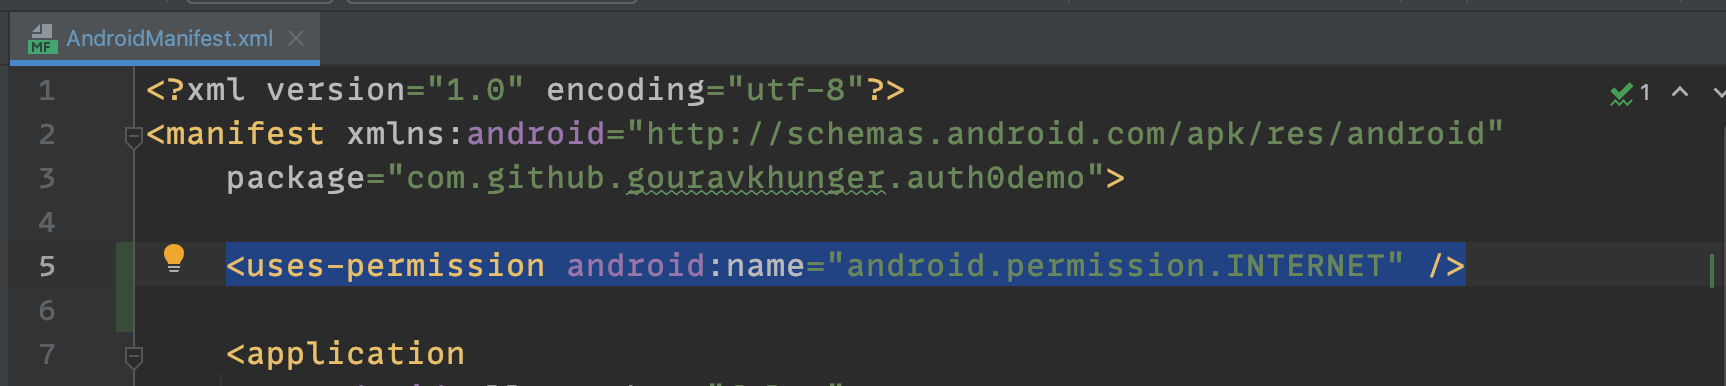 Adding internet permission in AndroidManifest.xml file